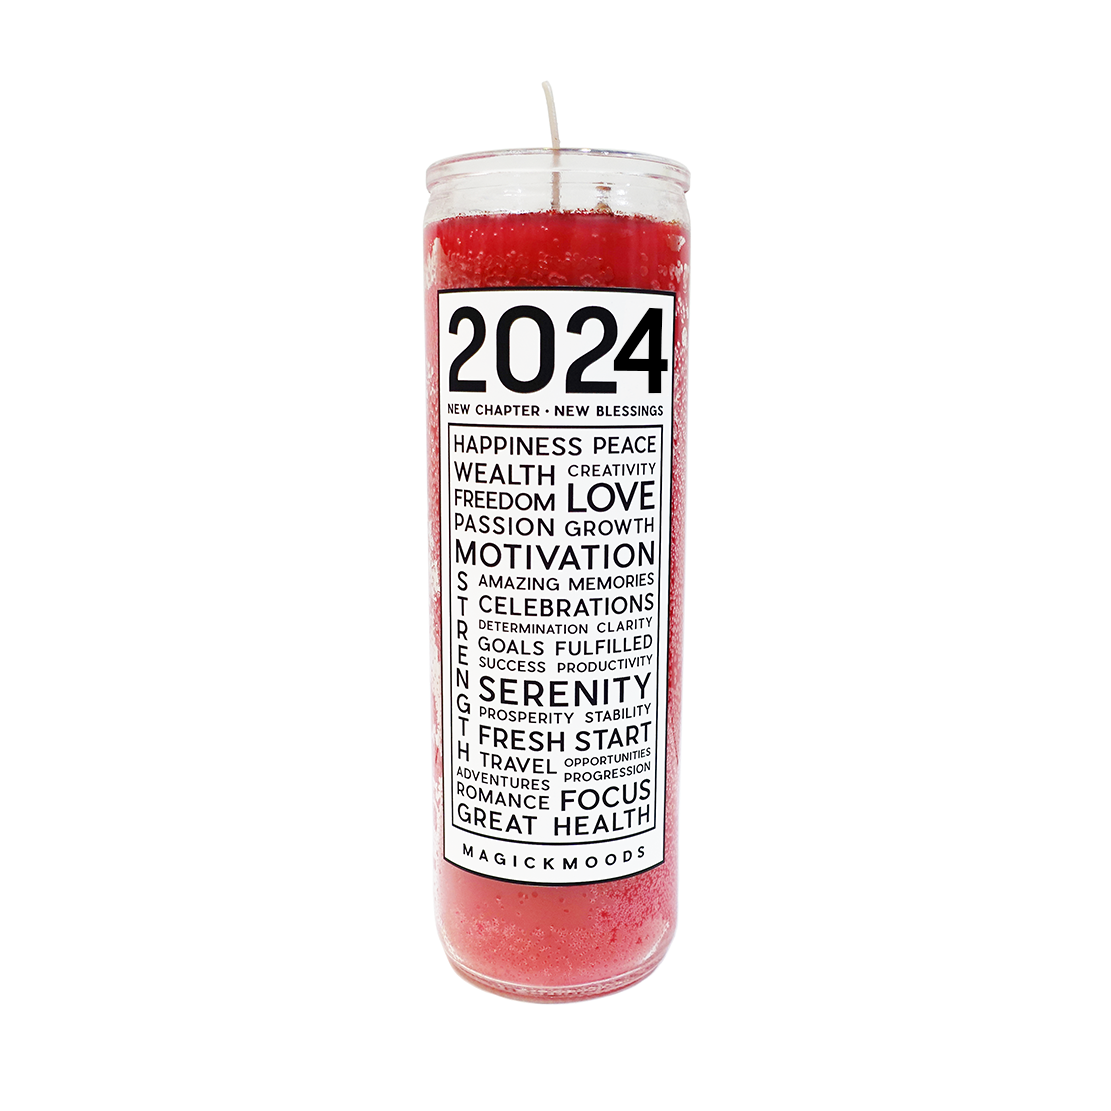 2024 Blessings 7-Day Meditation Candle - PREORDER - Ships by Feb 26th, 2024